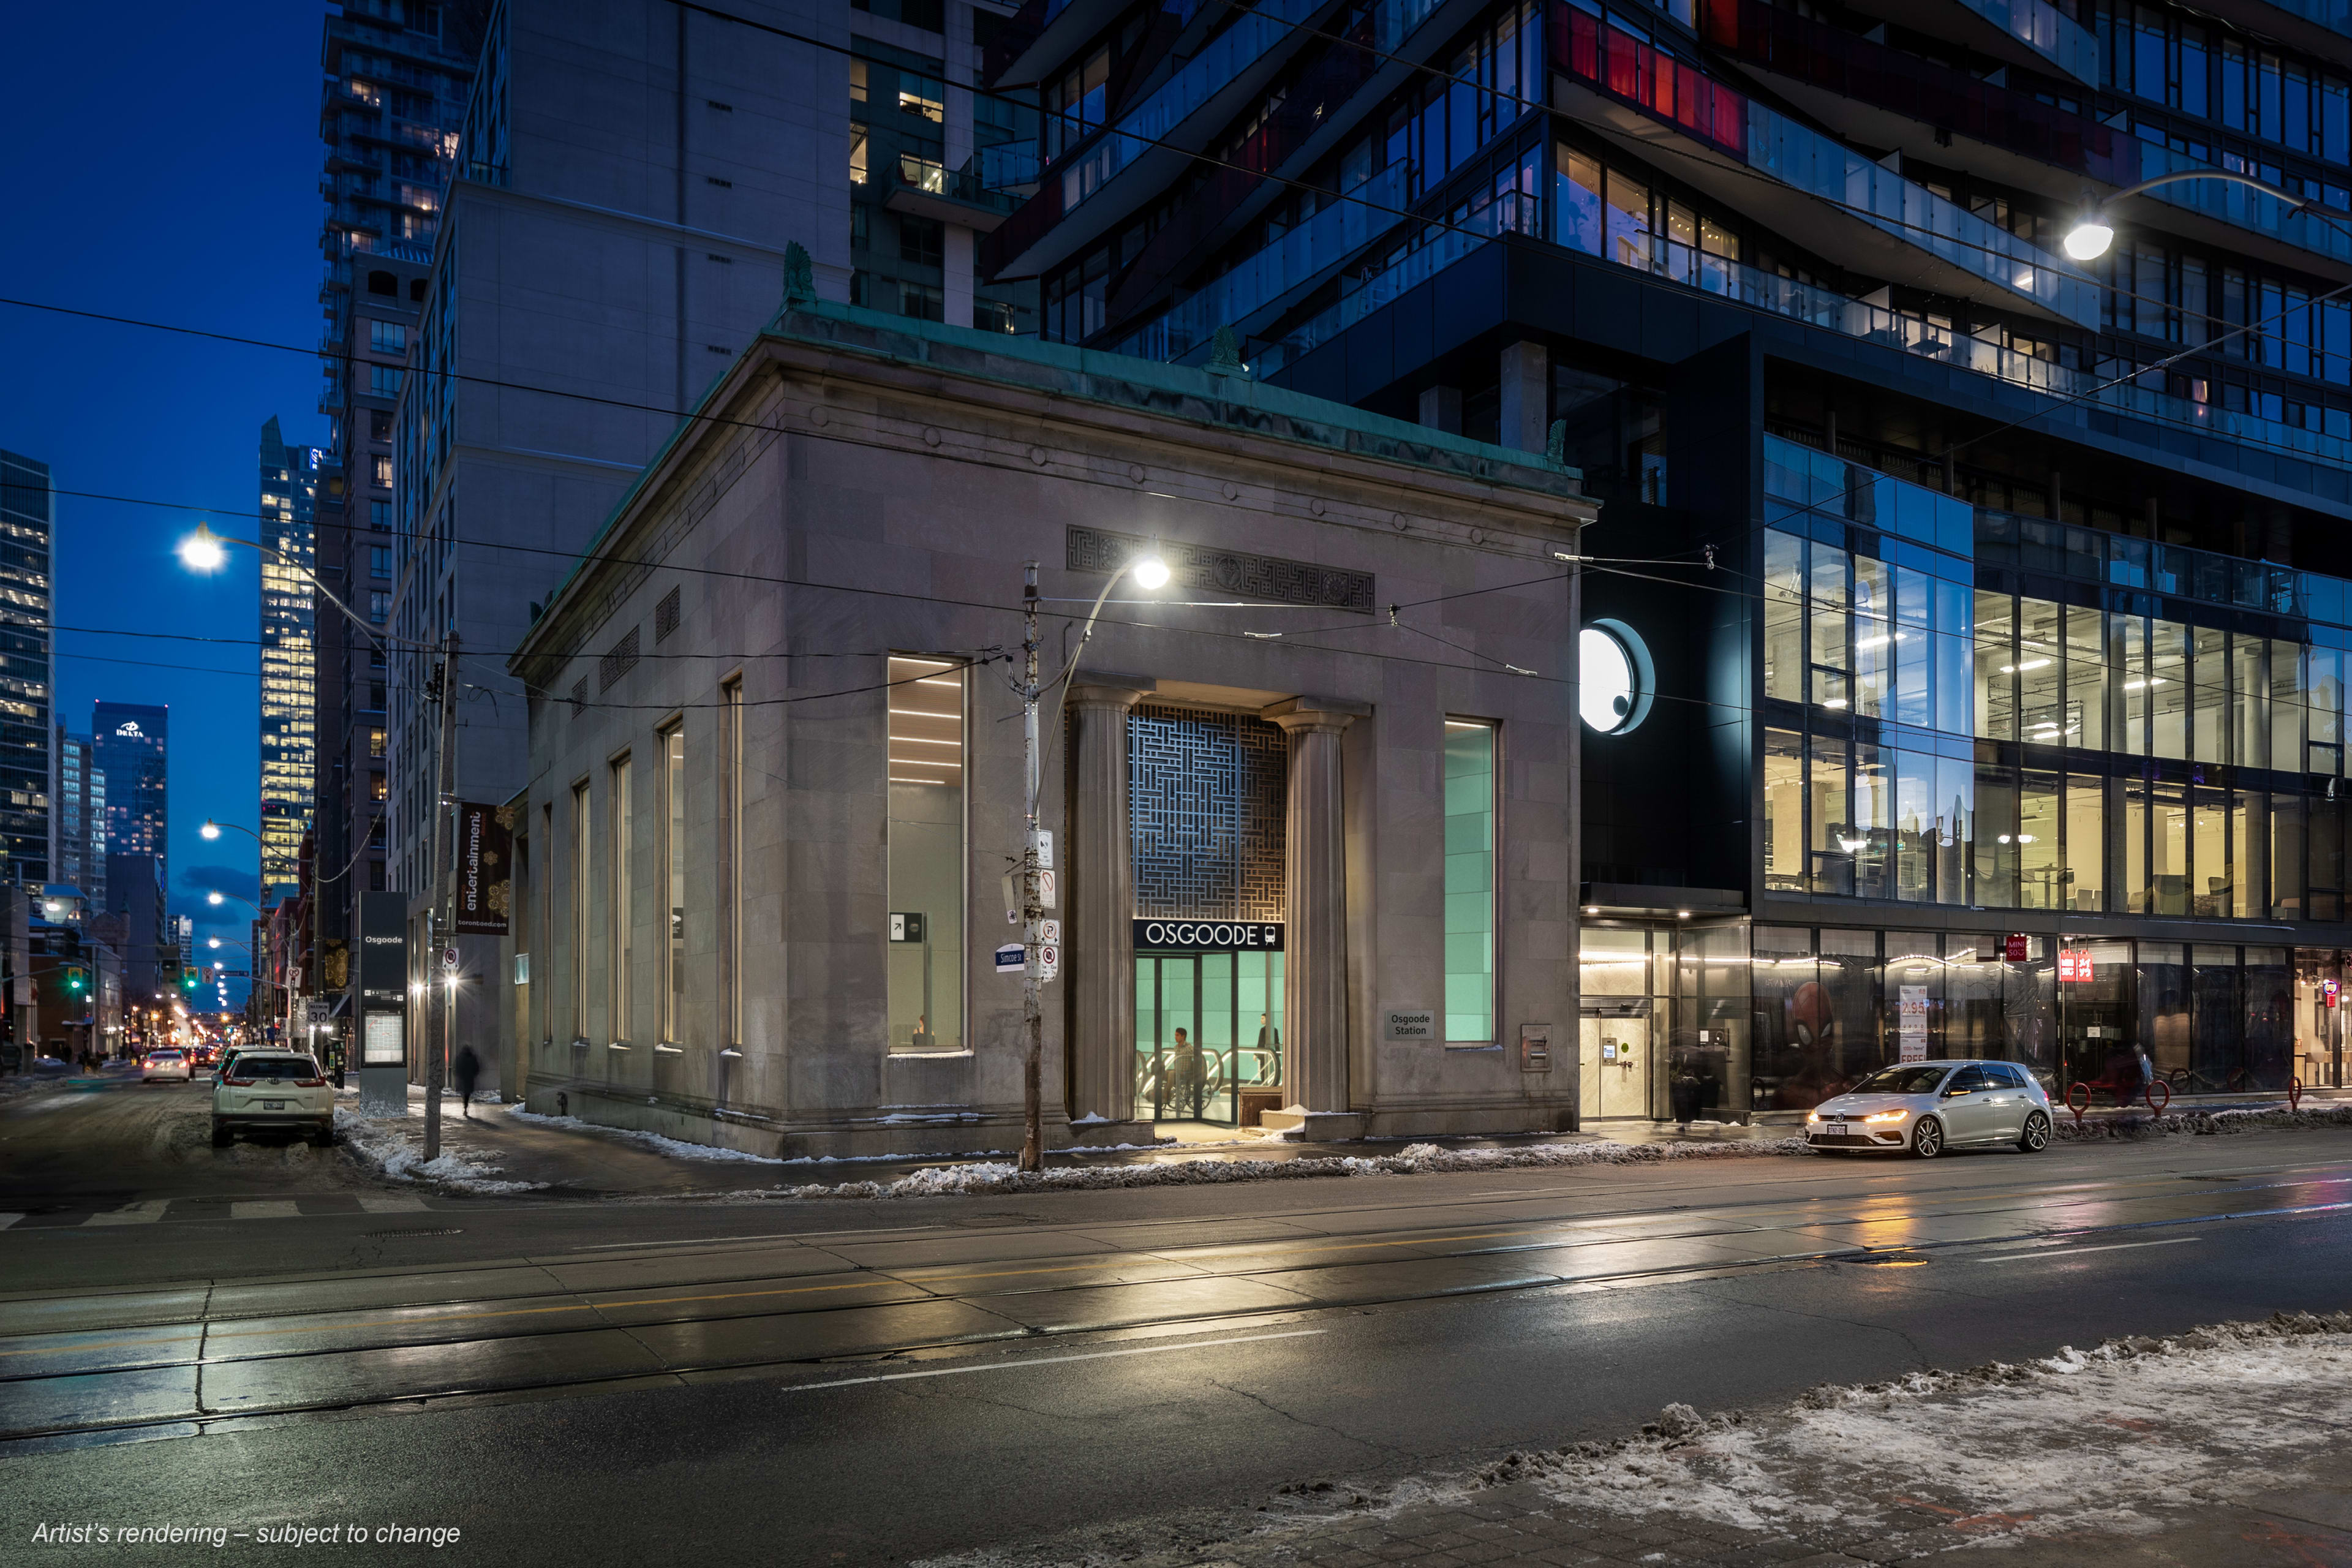 Future Ontario Line station incorporating the historic façade of the building at 205 Queen St W.